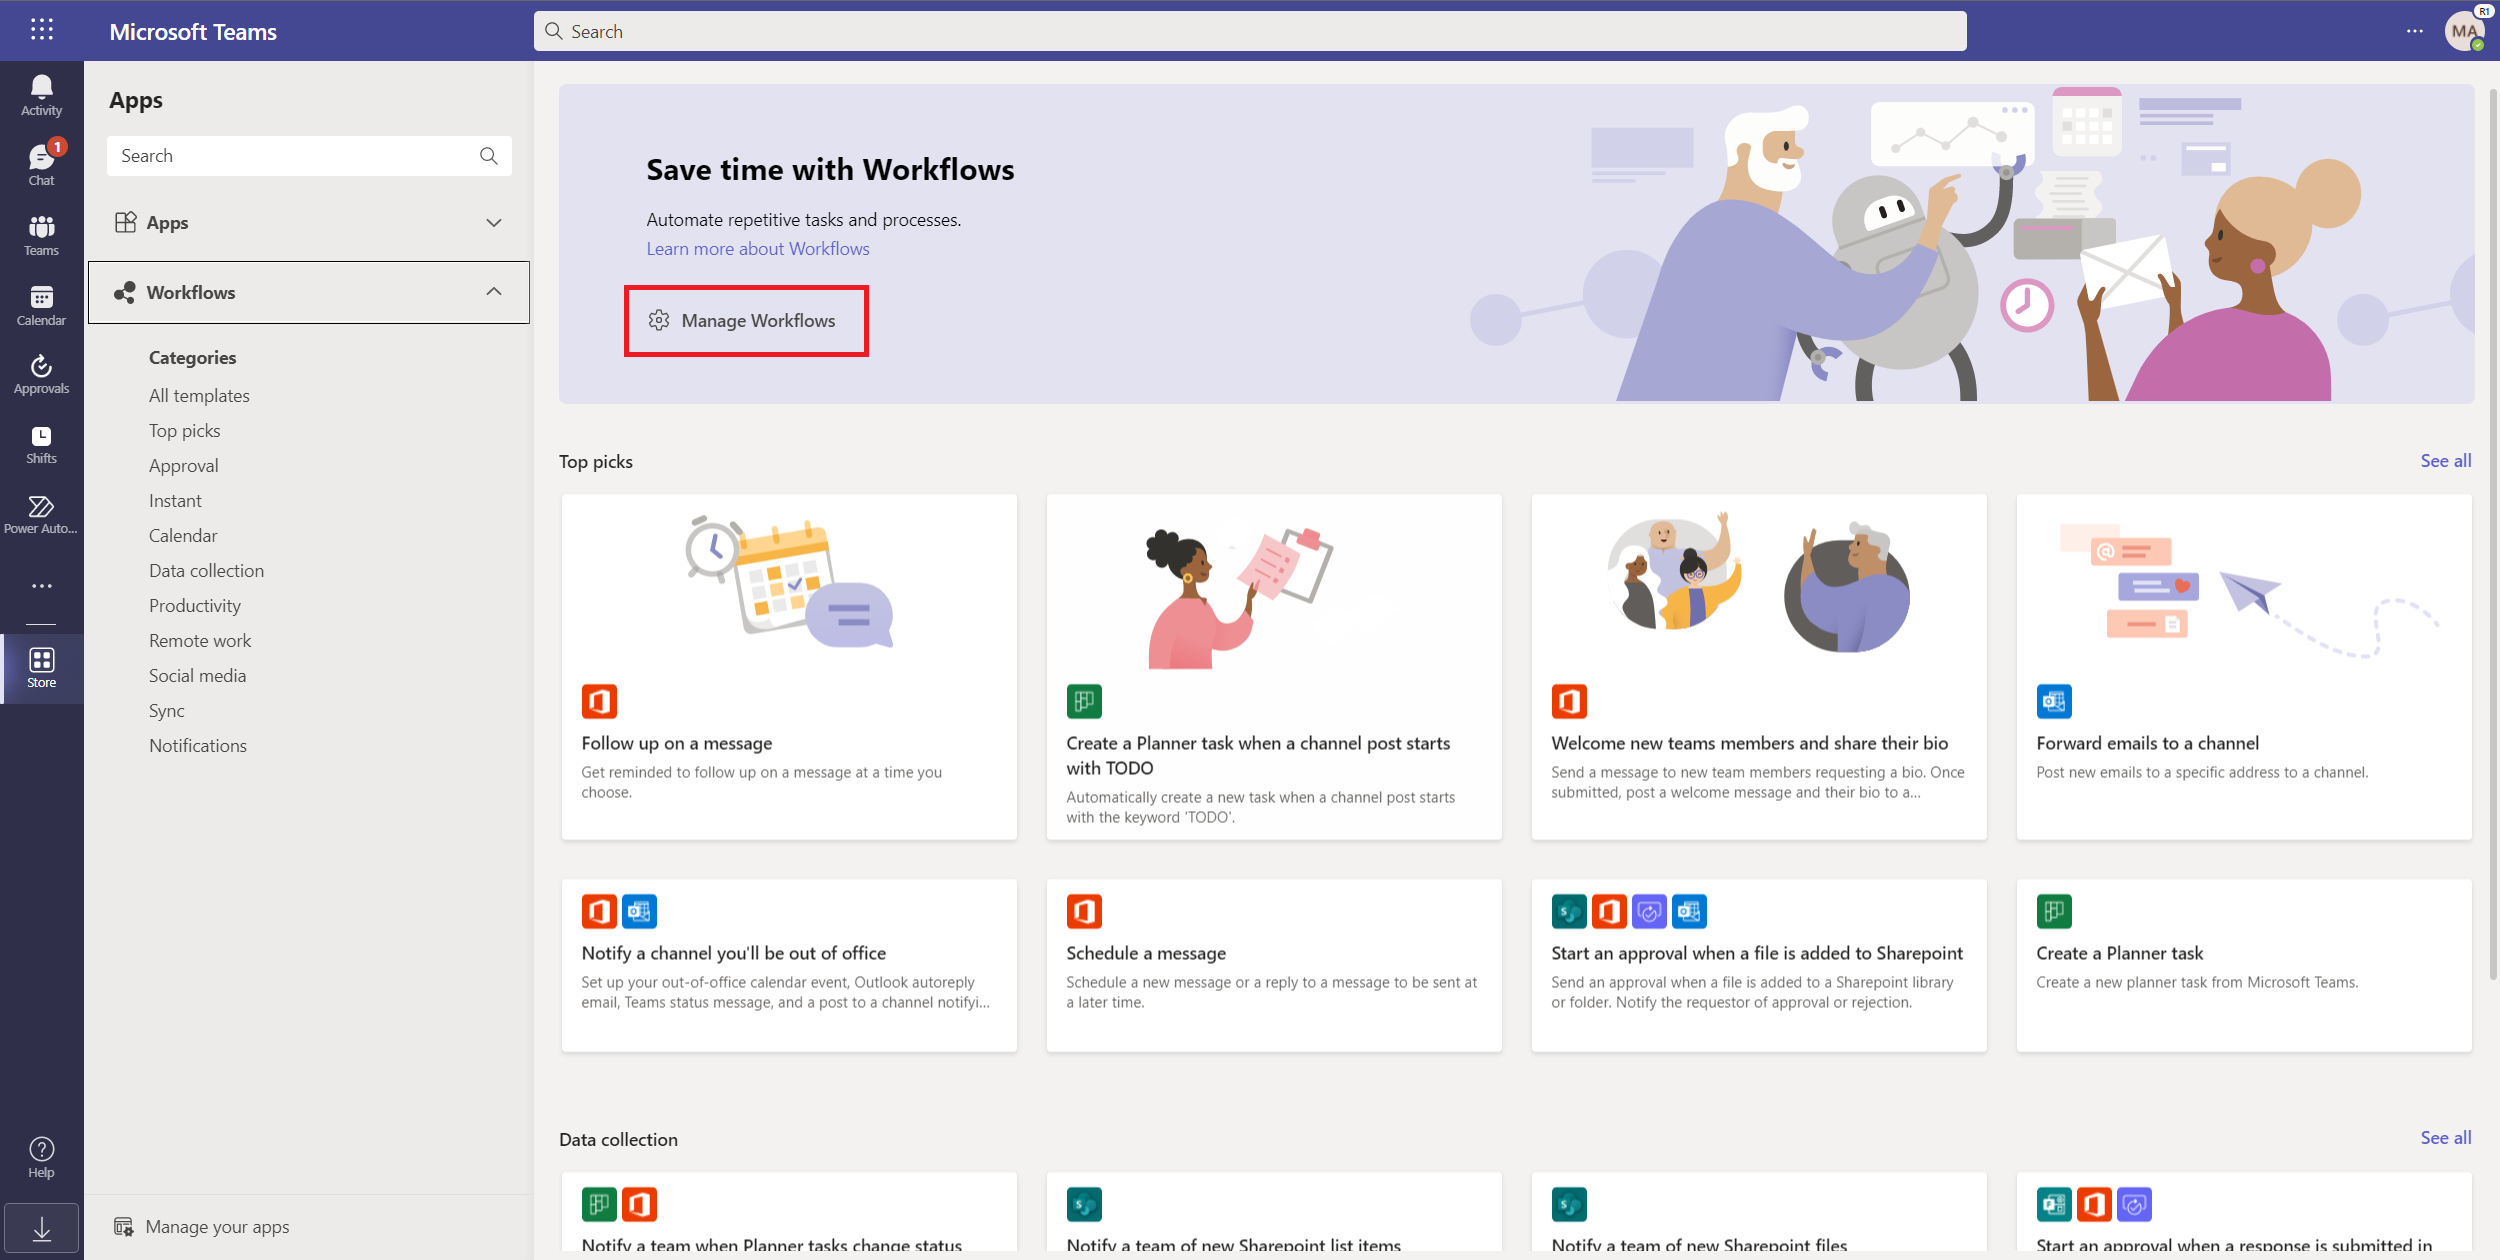 Workflow automation
Team site creation and management